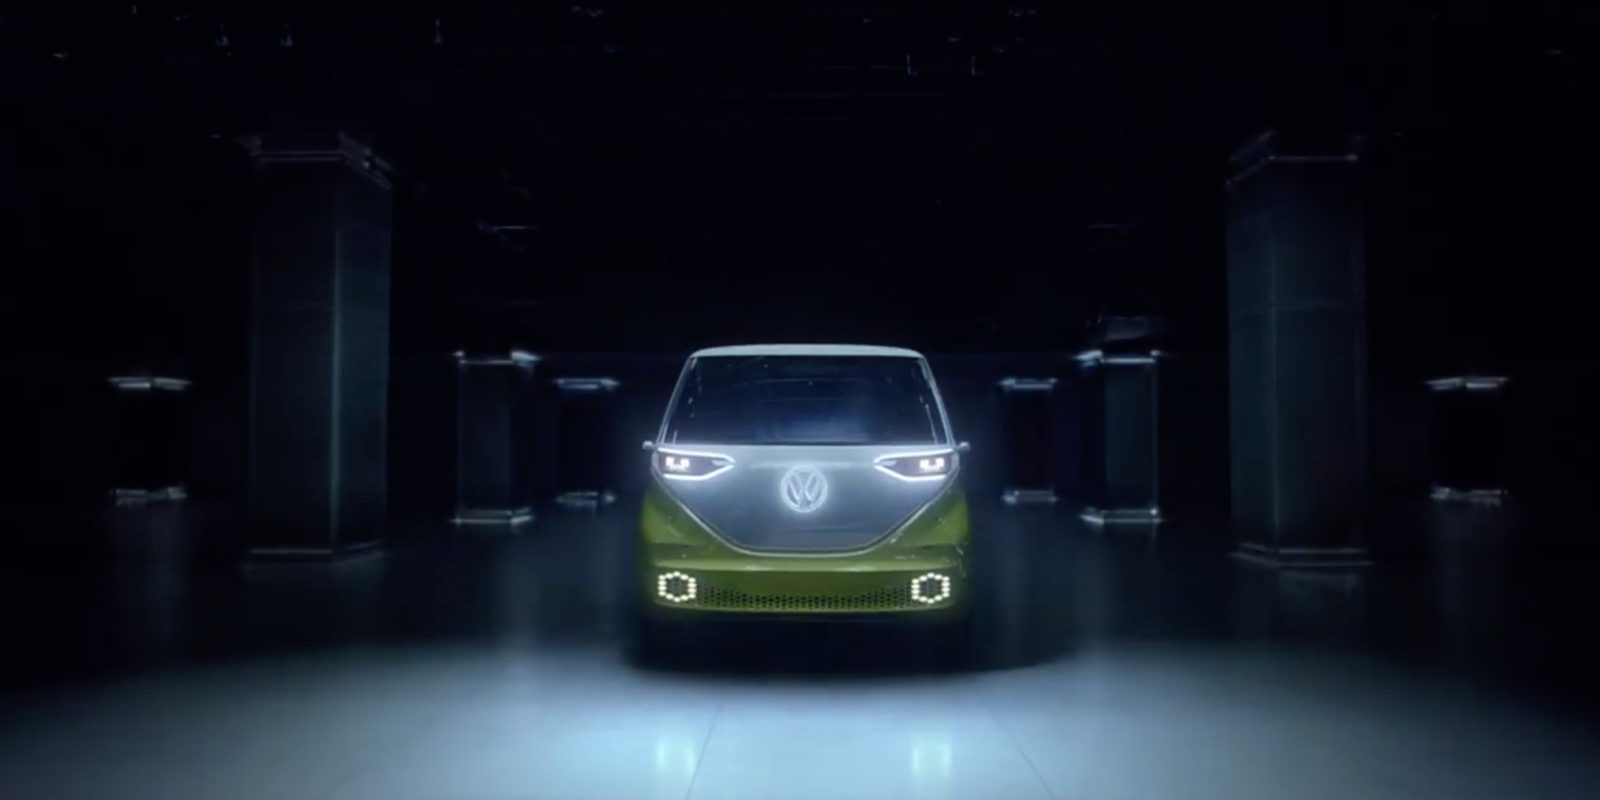 Volkswagen's Hello Light ad looks to turn the page from the carmaker's emissions scandal